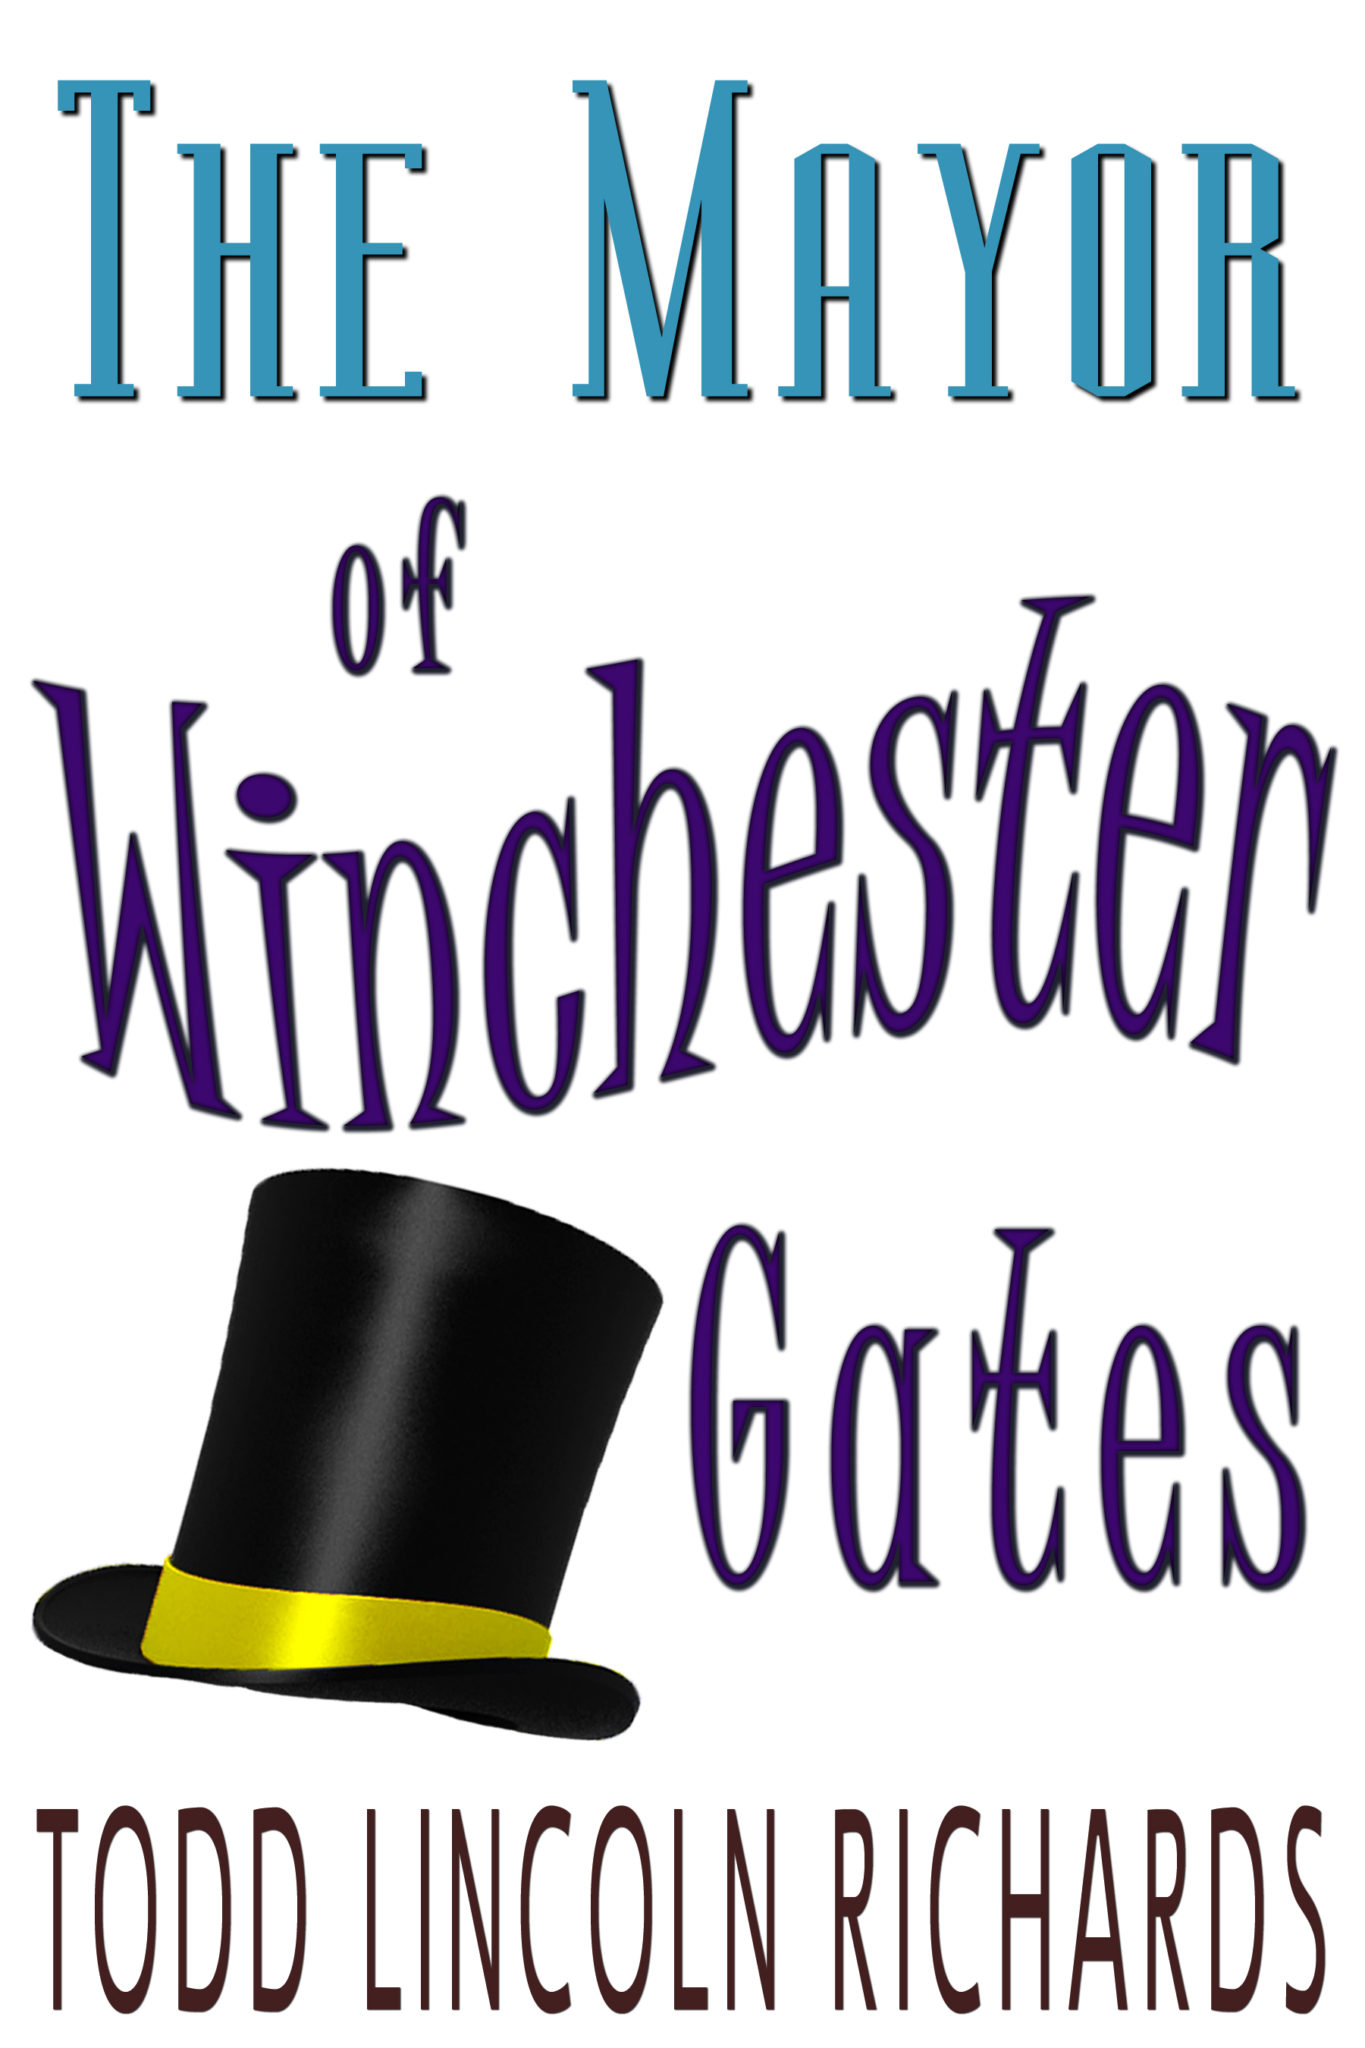 FREE: The Mayor of Winchester Gates by Todd Lincoln Richards